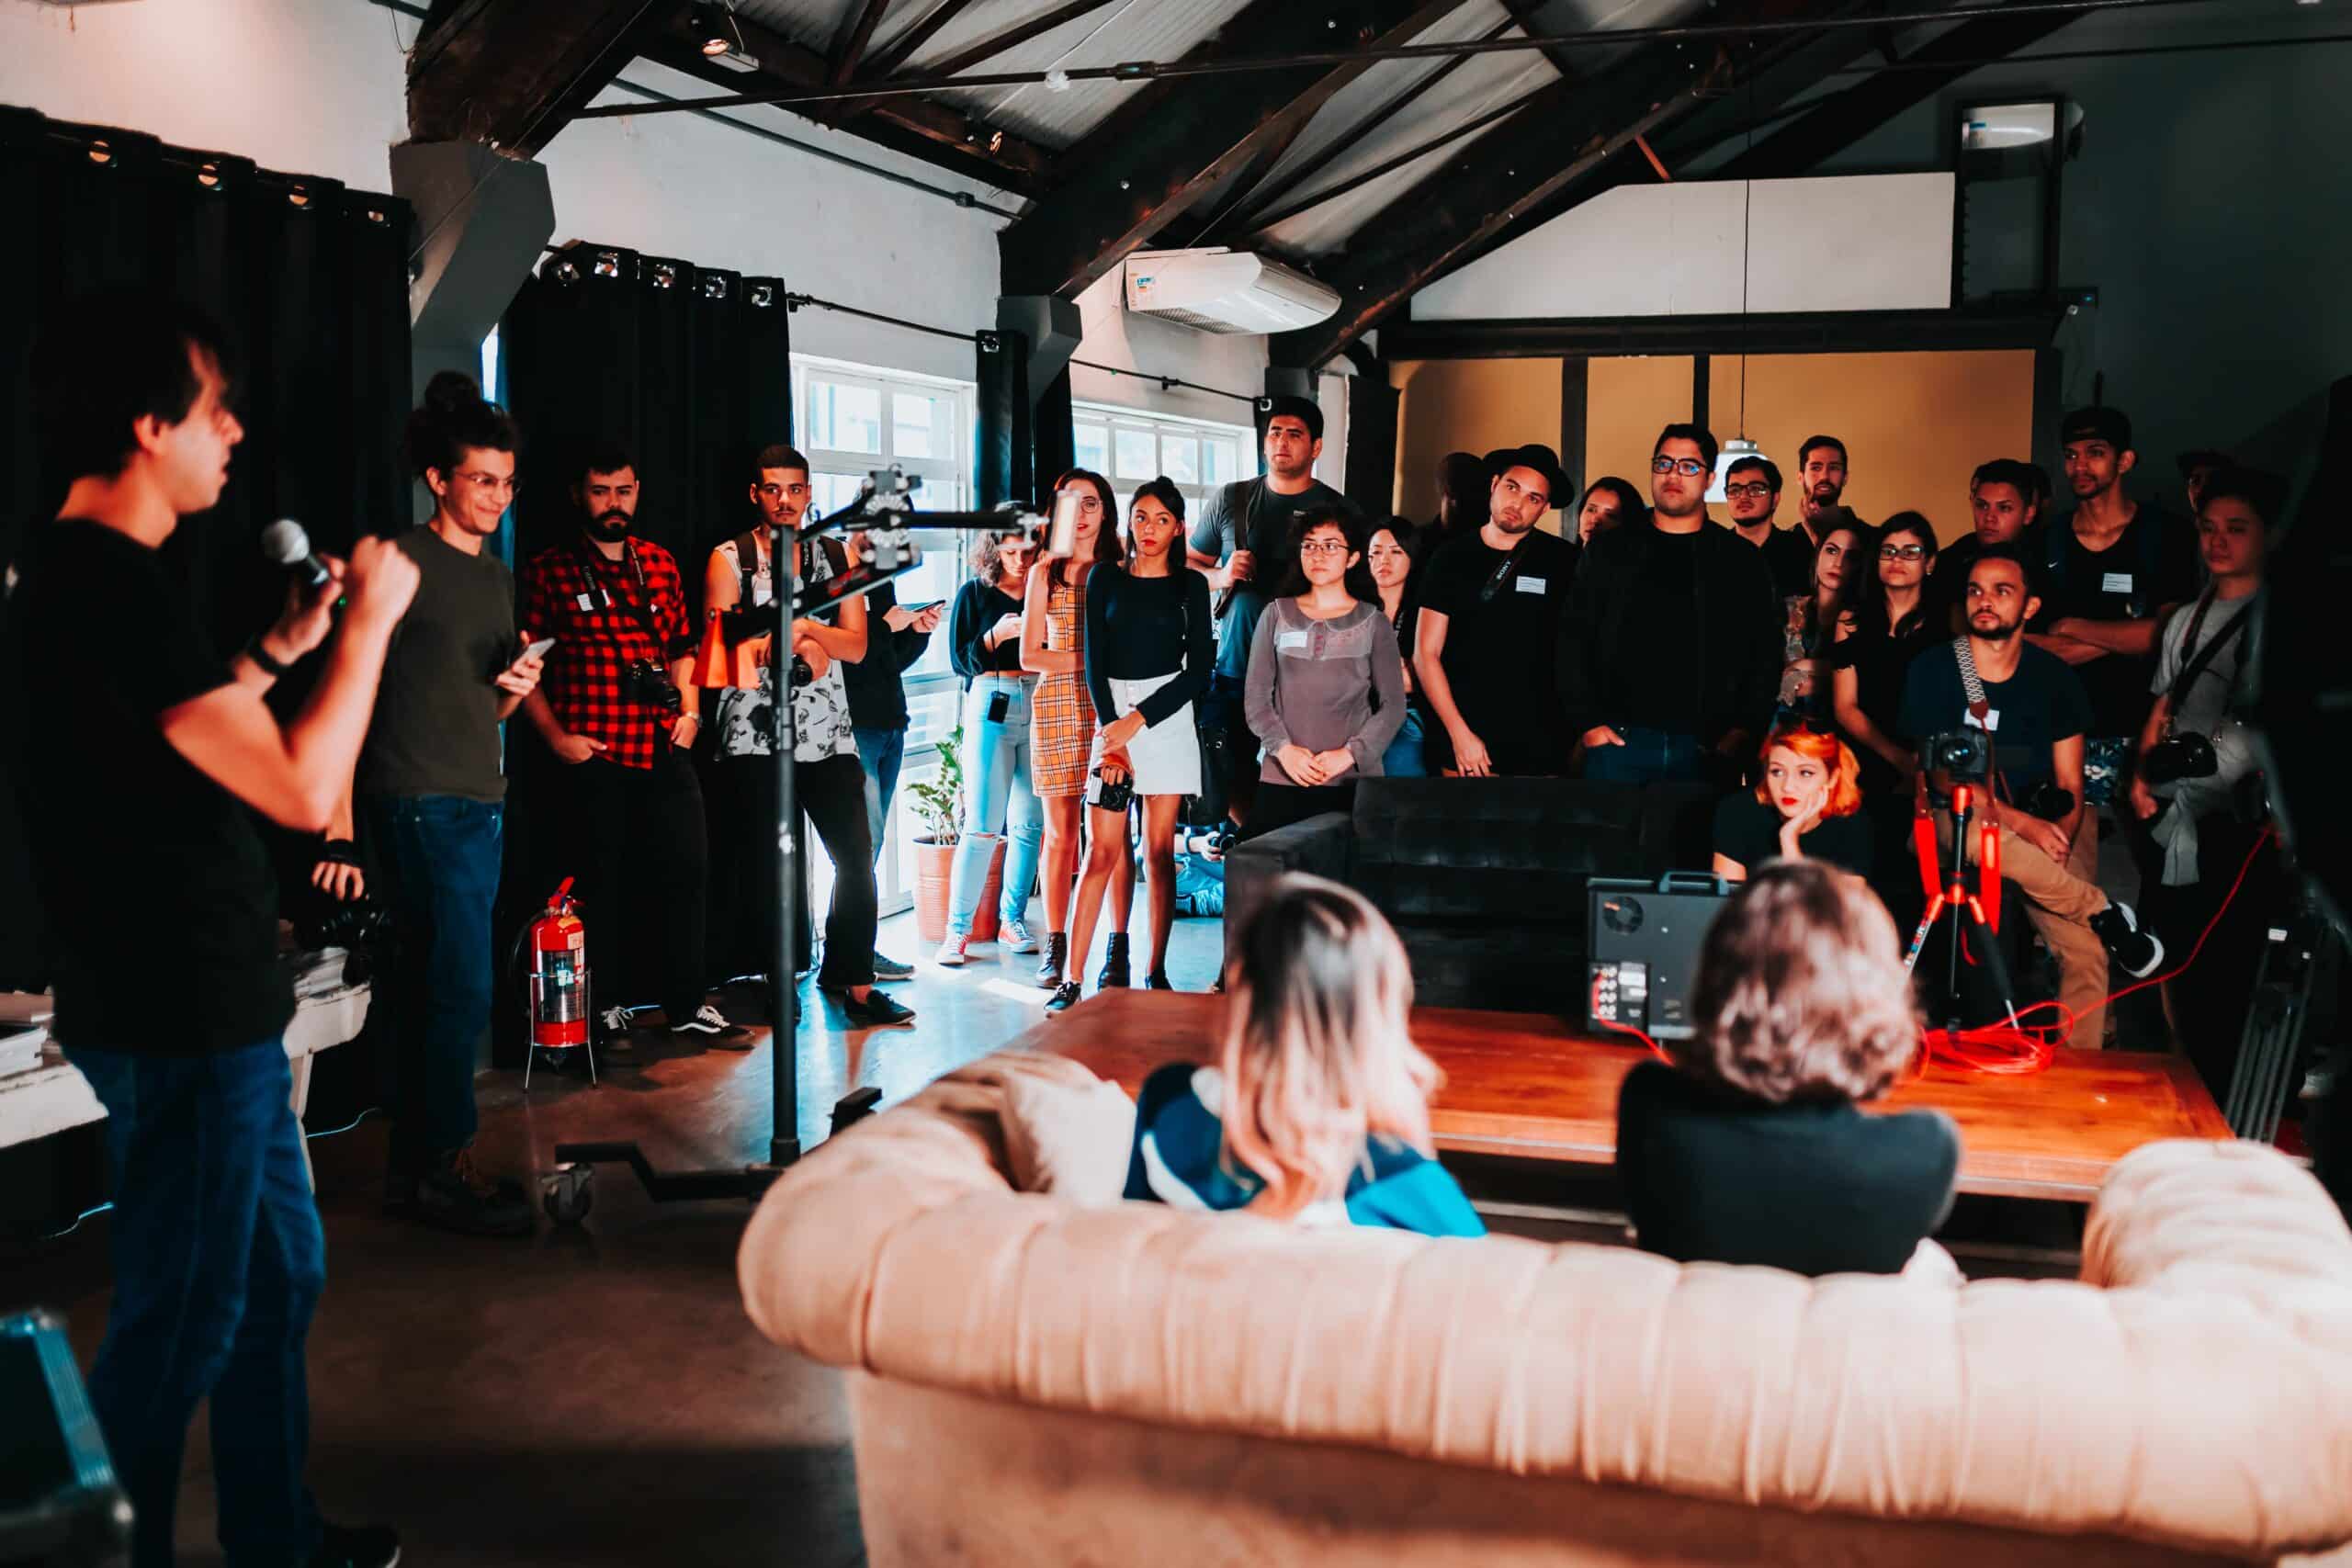 A dynamic group of people gathered in an indoor event space, attentively listening to a speaker at the front, illustrating the concept of 'building your tribe' in a community or business setting